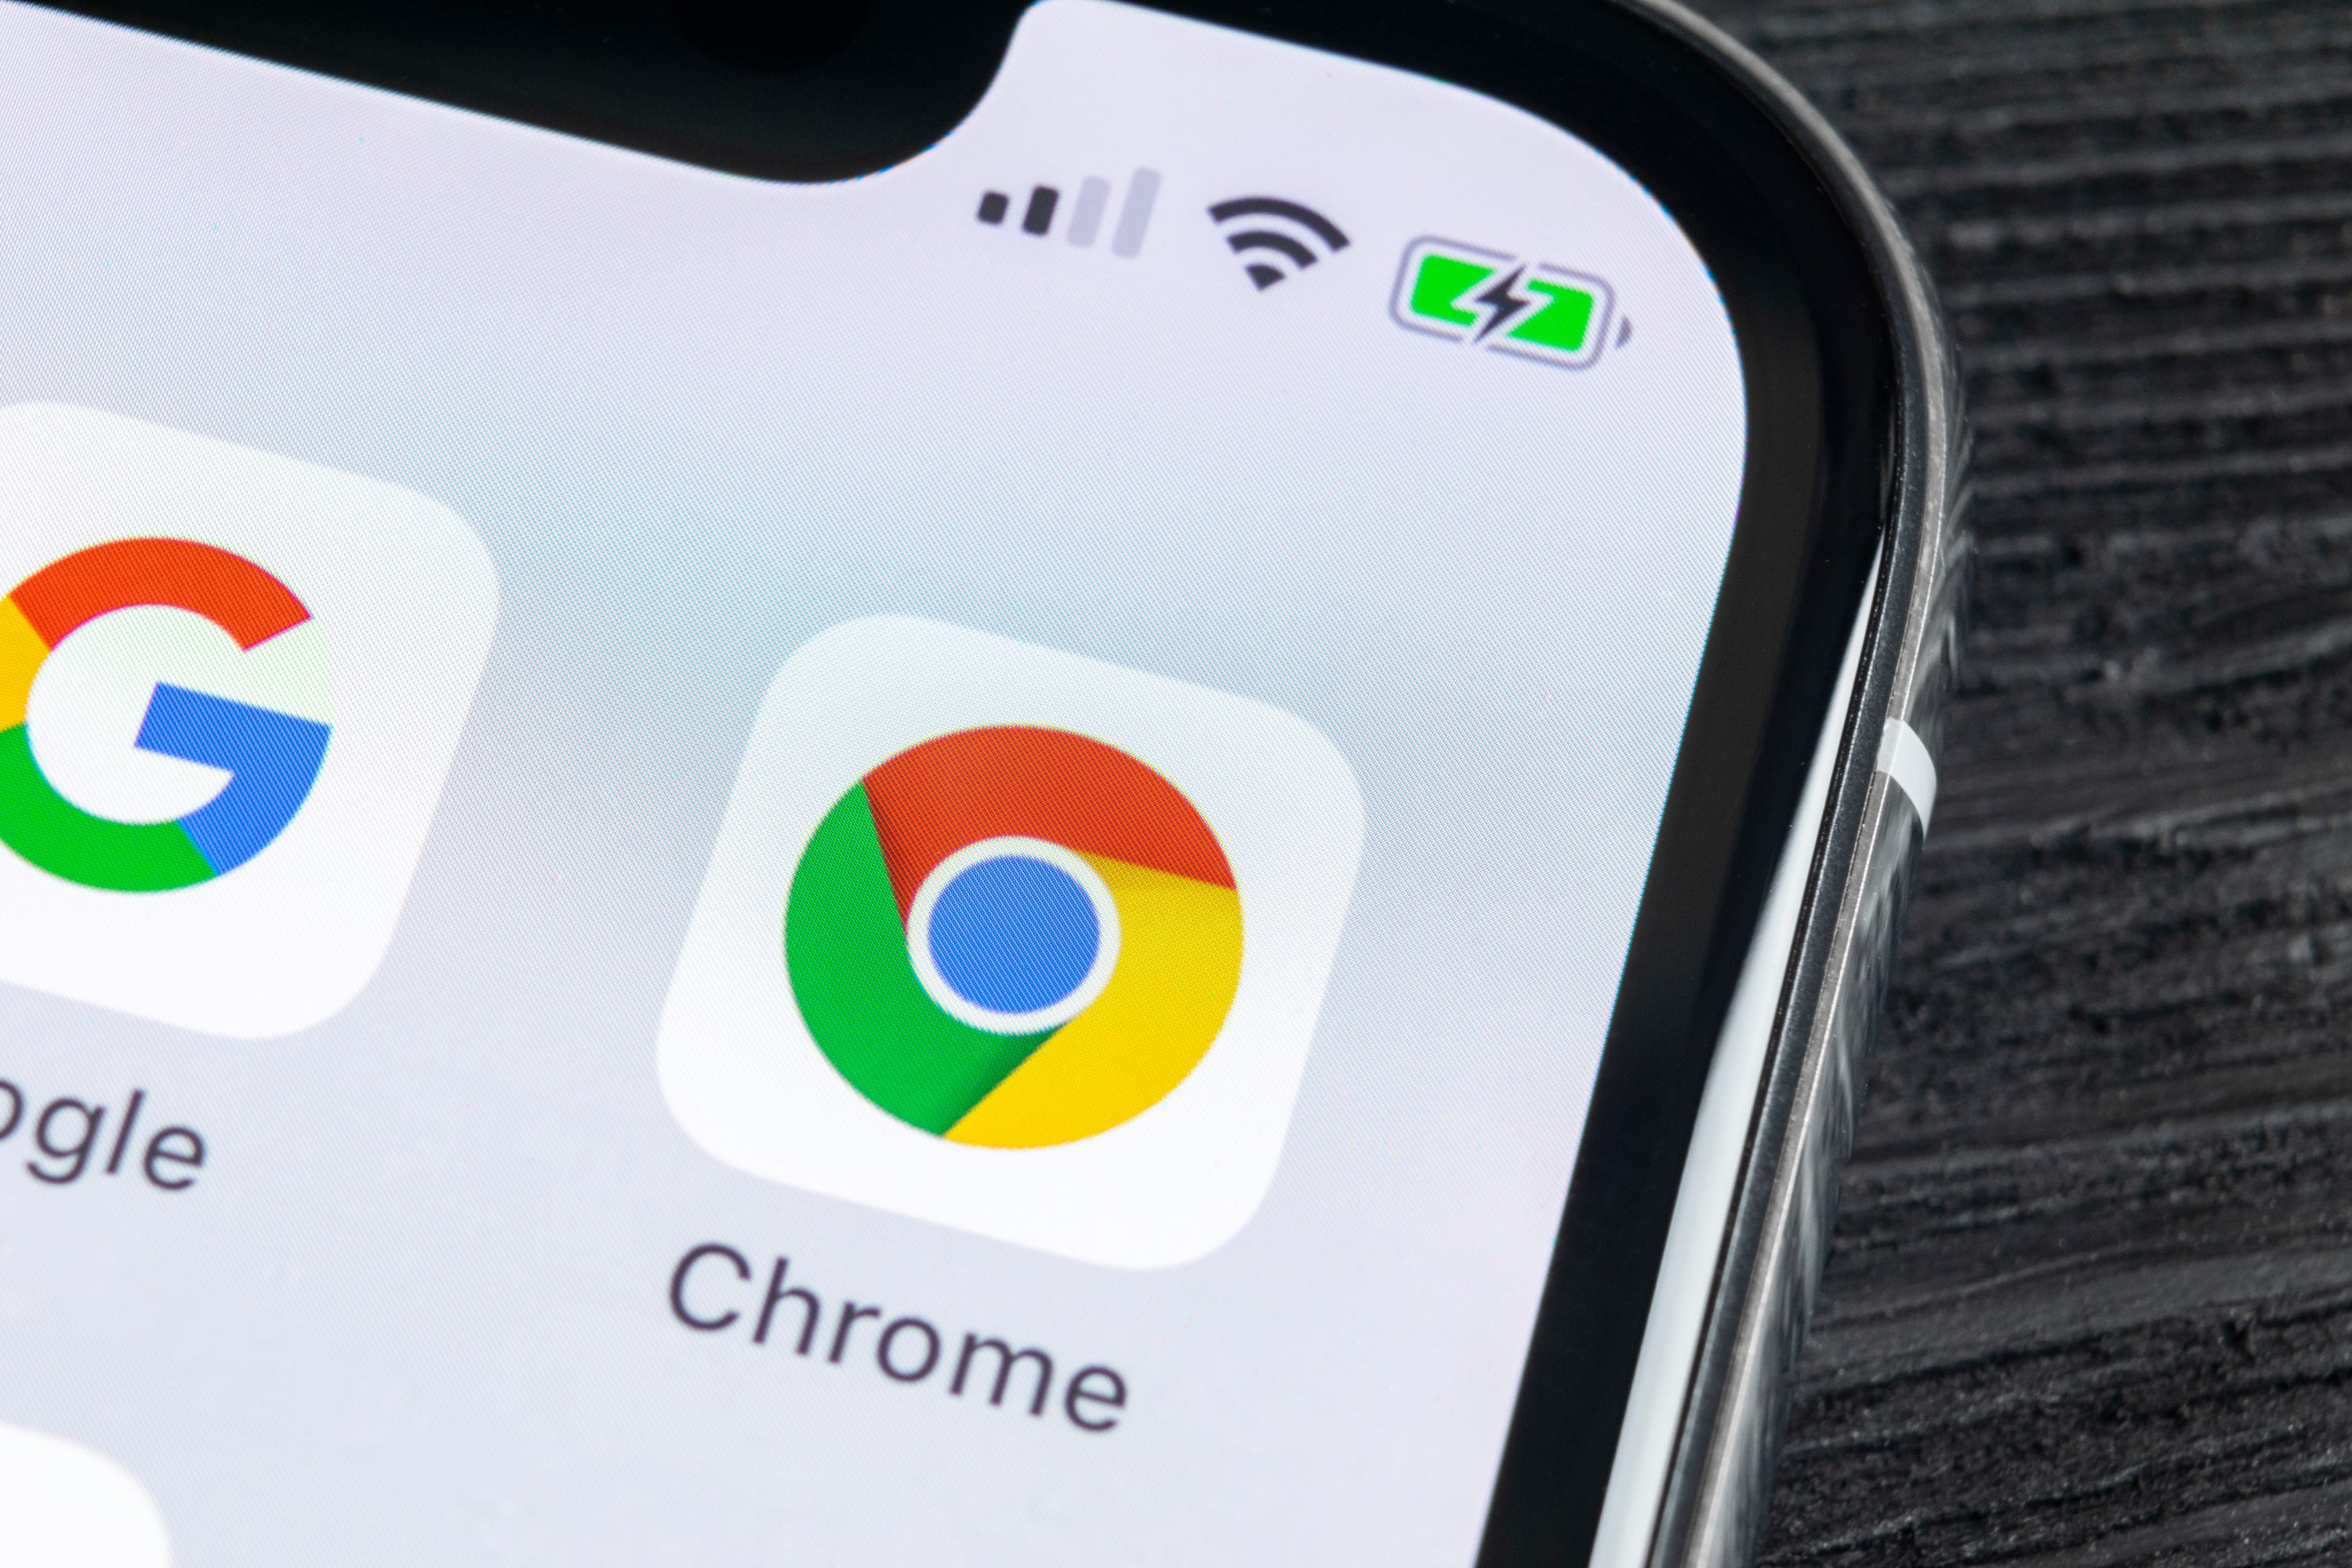 latest version of chrome for android